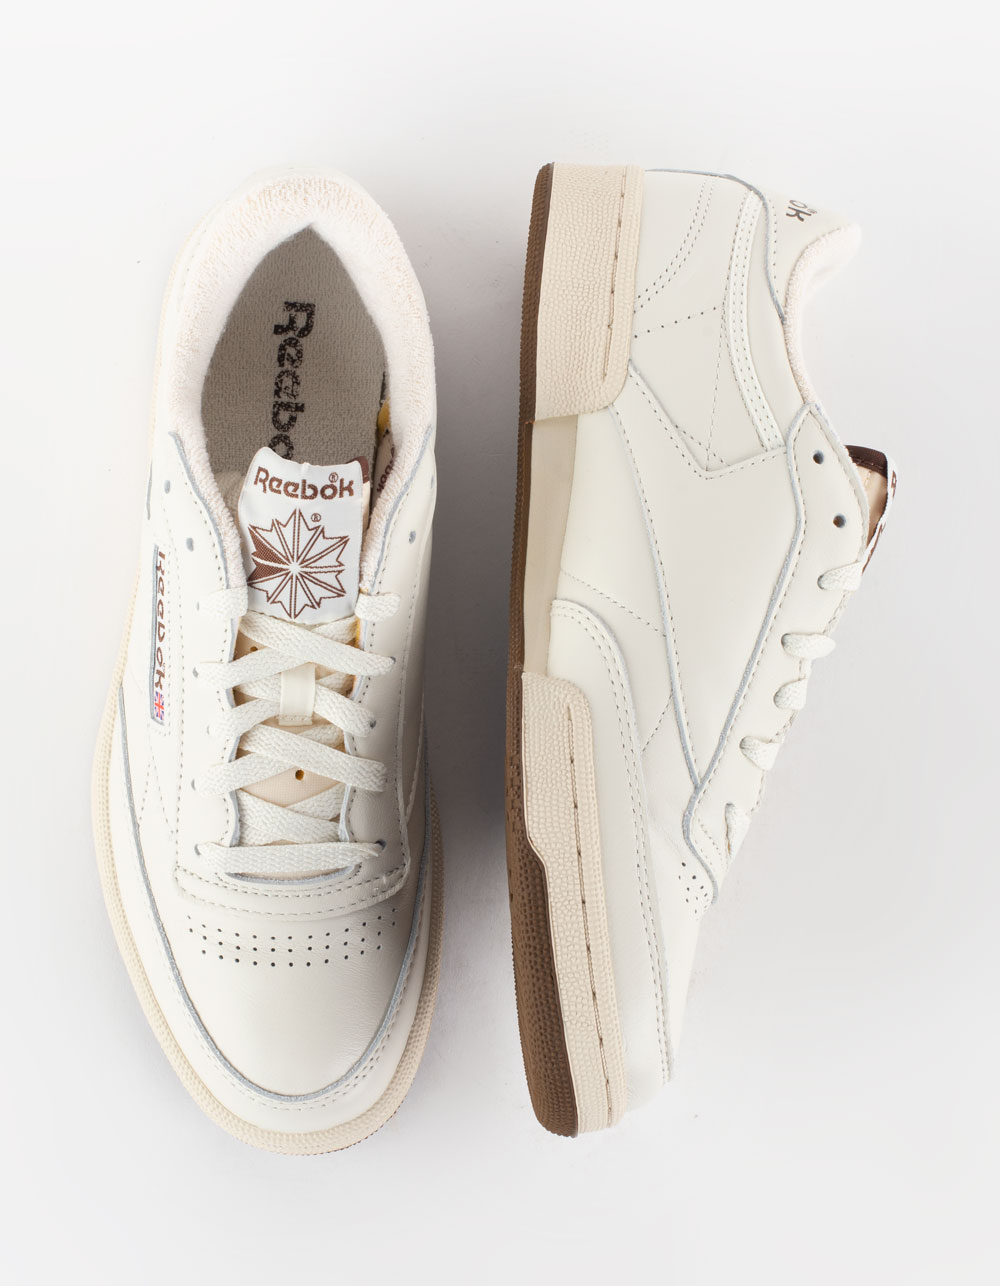 Club 85 Vintage Shoes OFF WHITE | Tillys